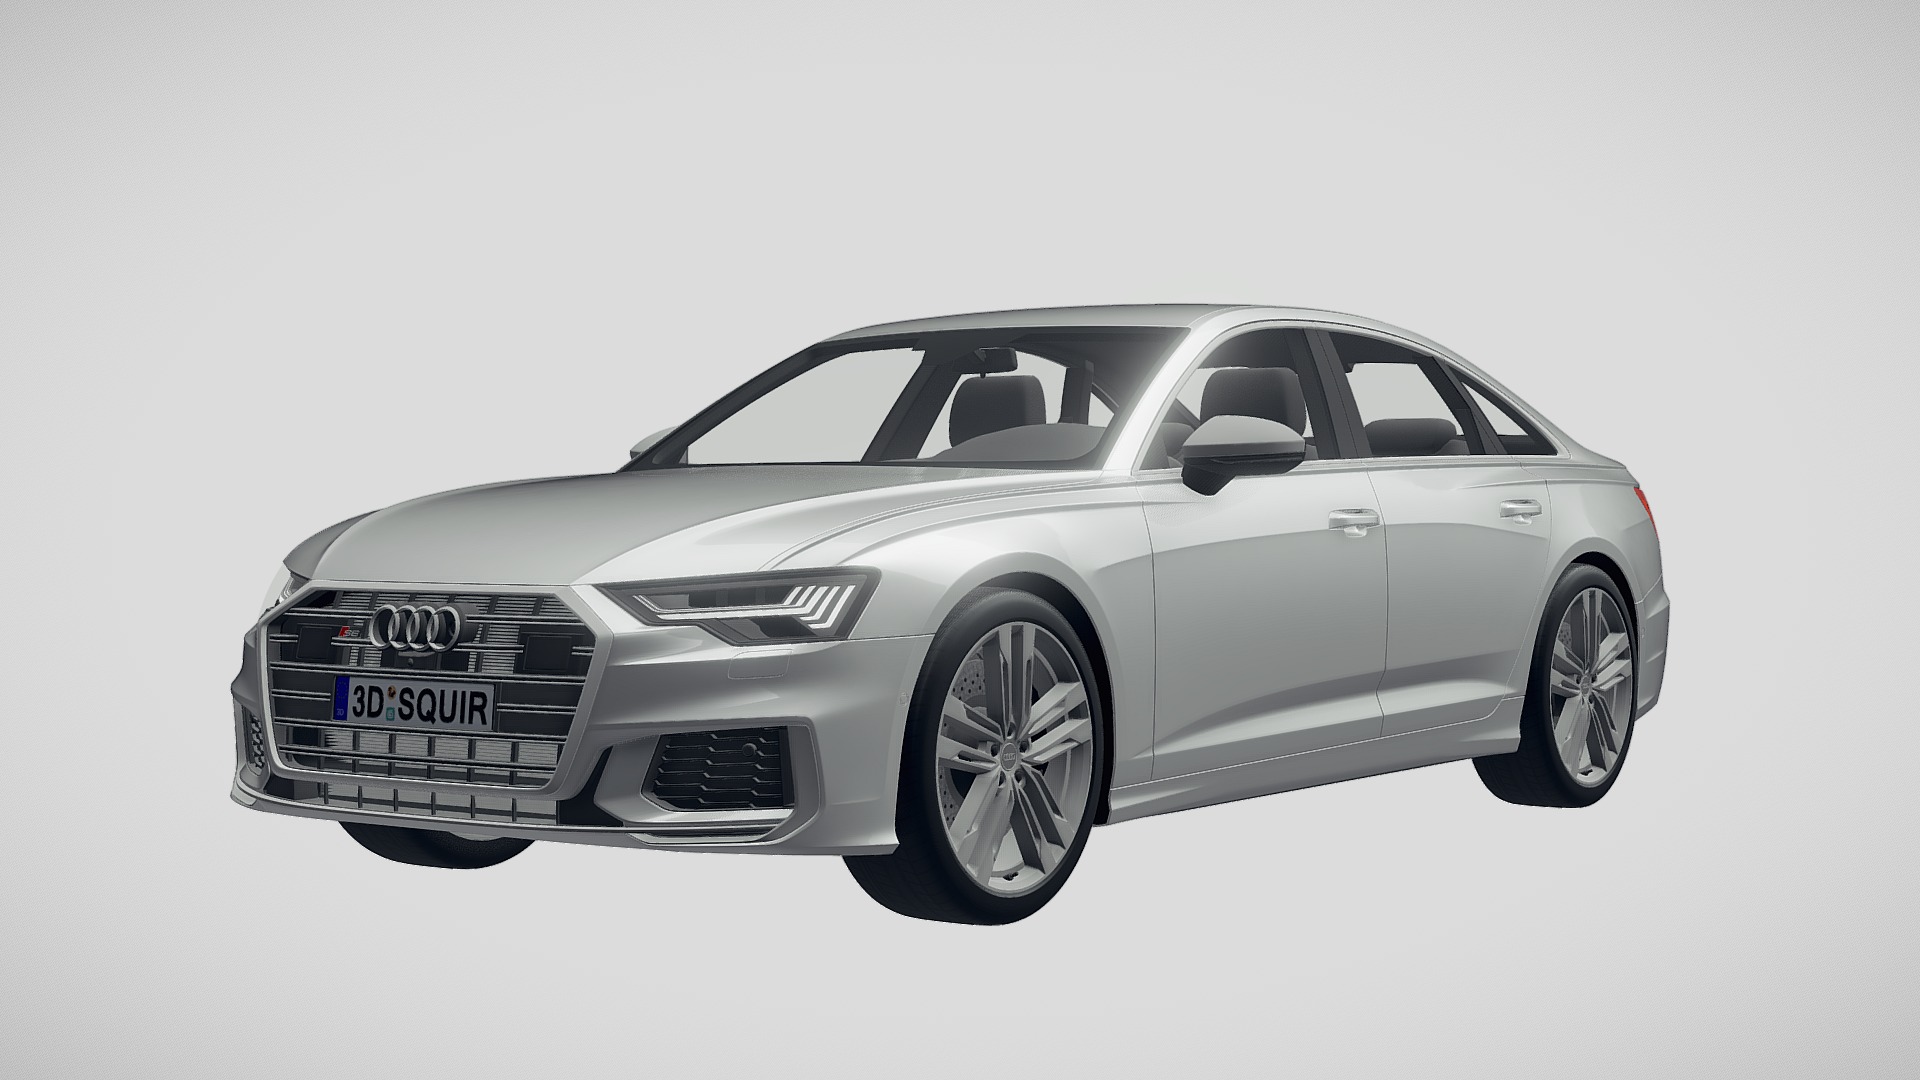 3D model Audi S6 2020 - This is a 3D model of the Audi S6 2020. The 3D model is about a silver sports car.